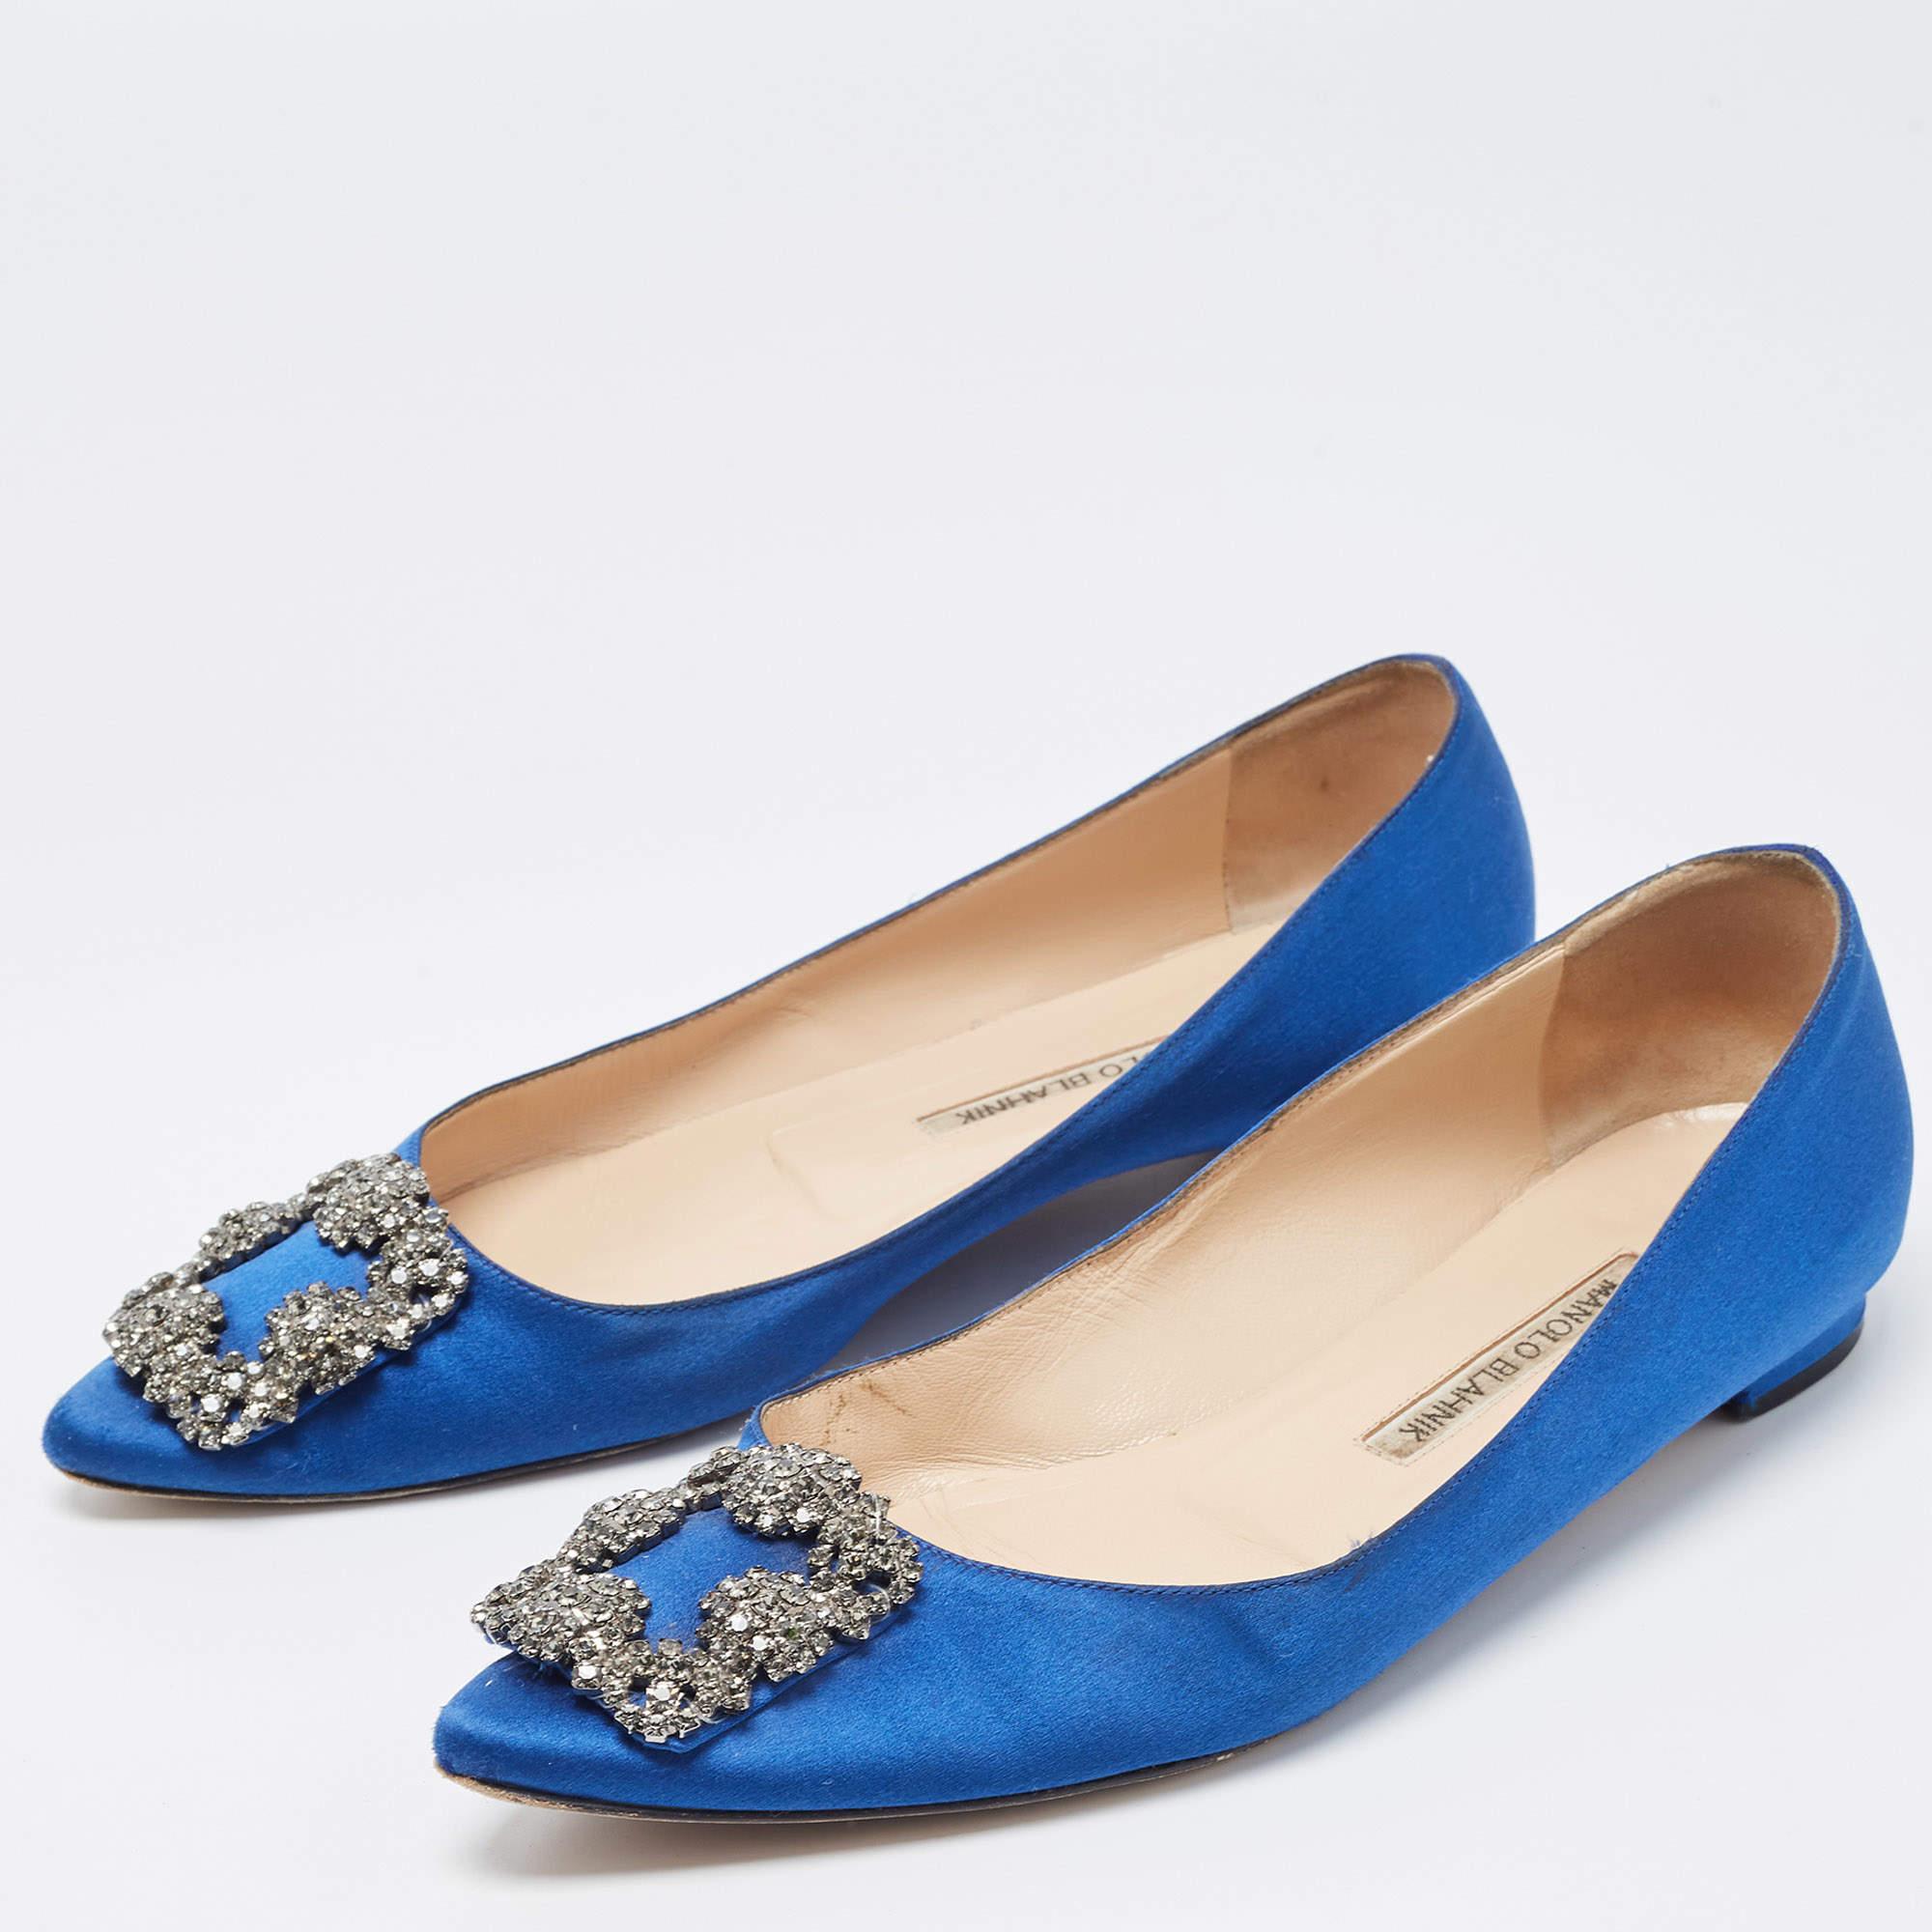 Chic and iconic, these ballet flats from Manolo Blahnik and perfect for a host of occasions. They have been crafted from blue satin and are styled with embellished toes.

